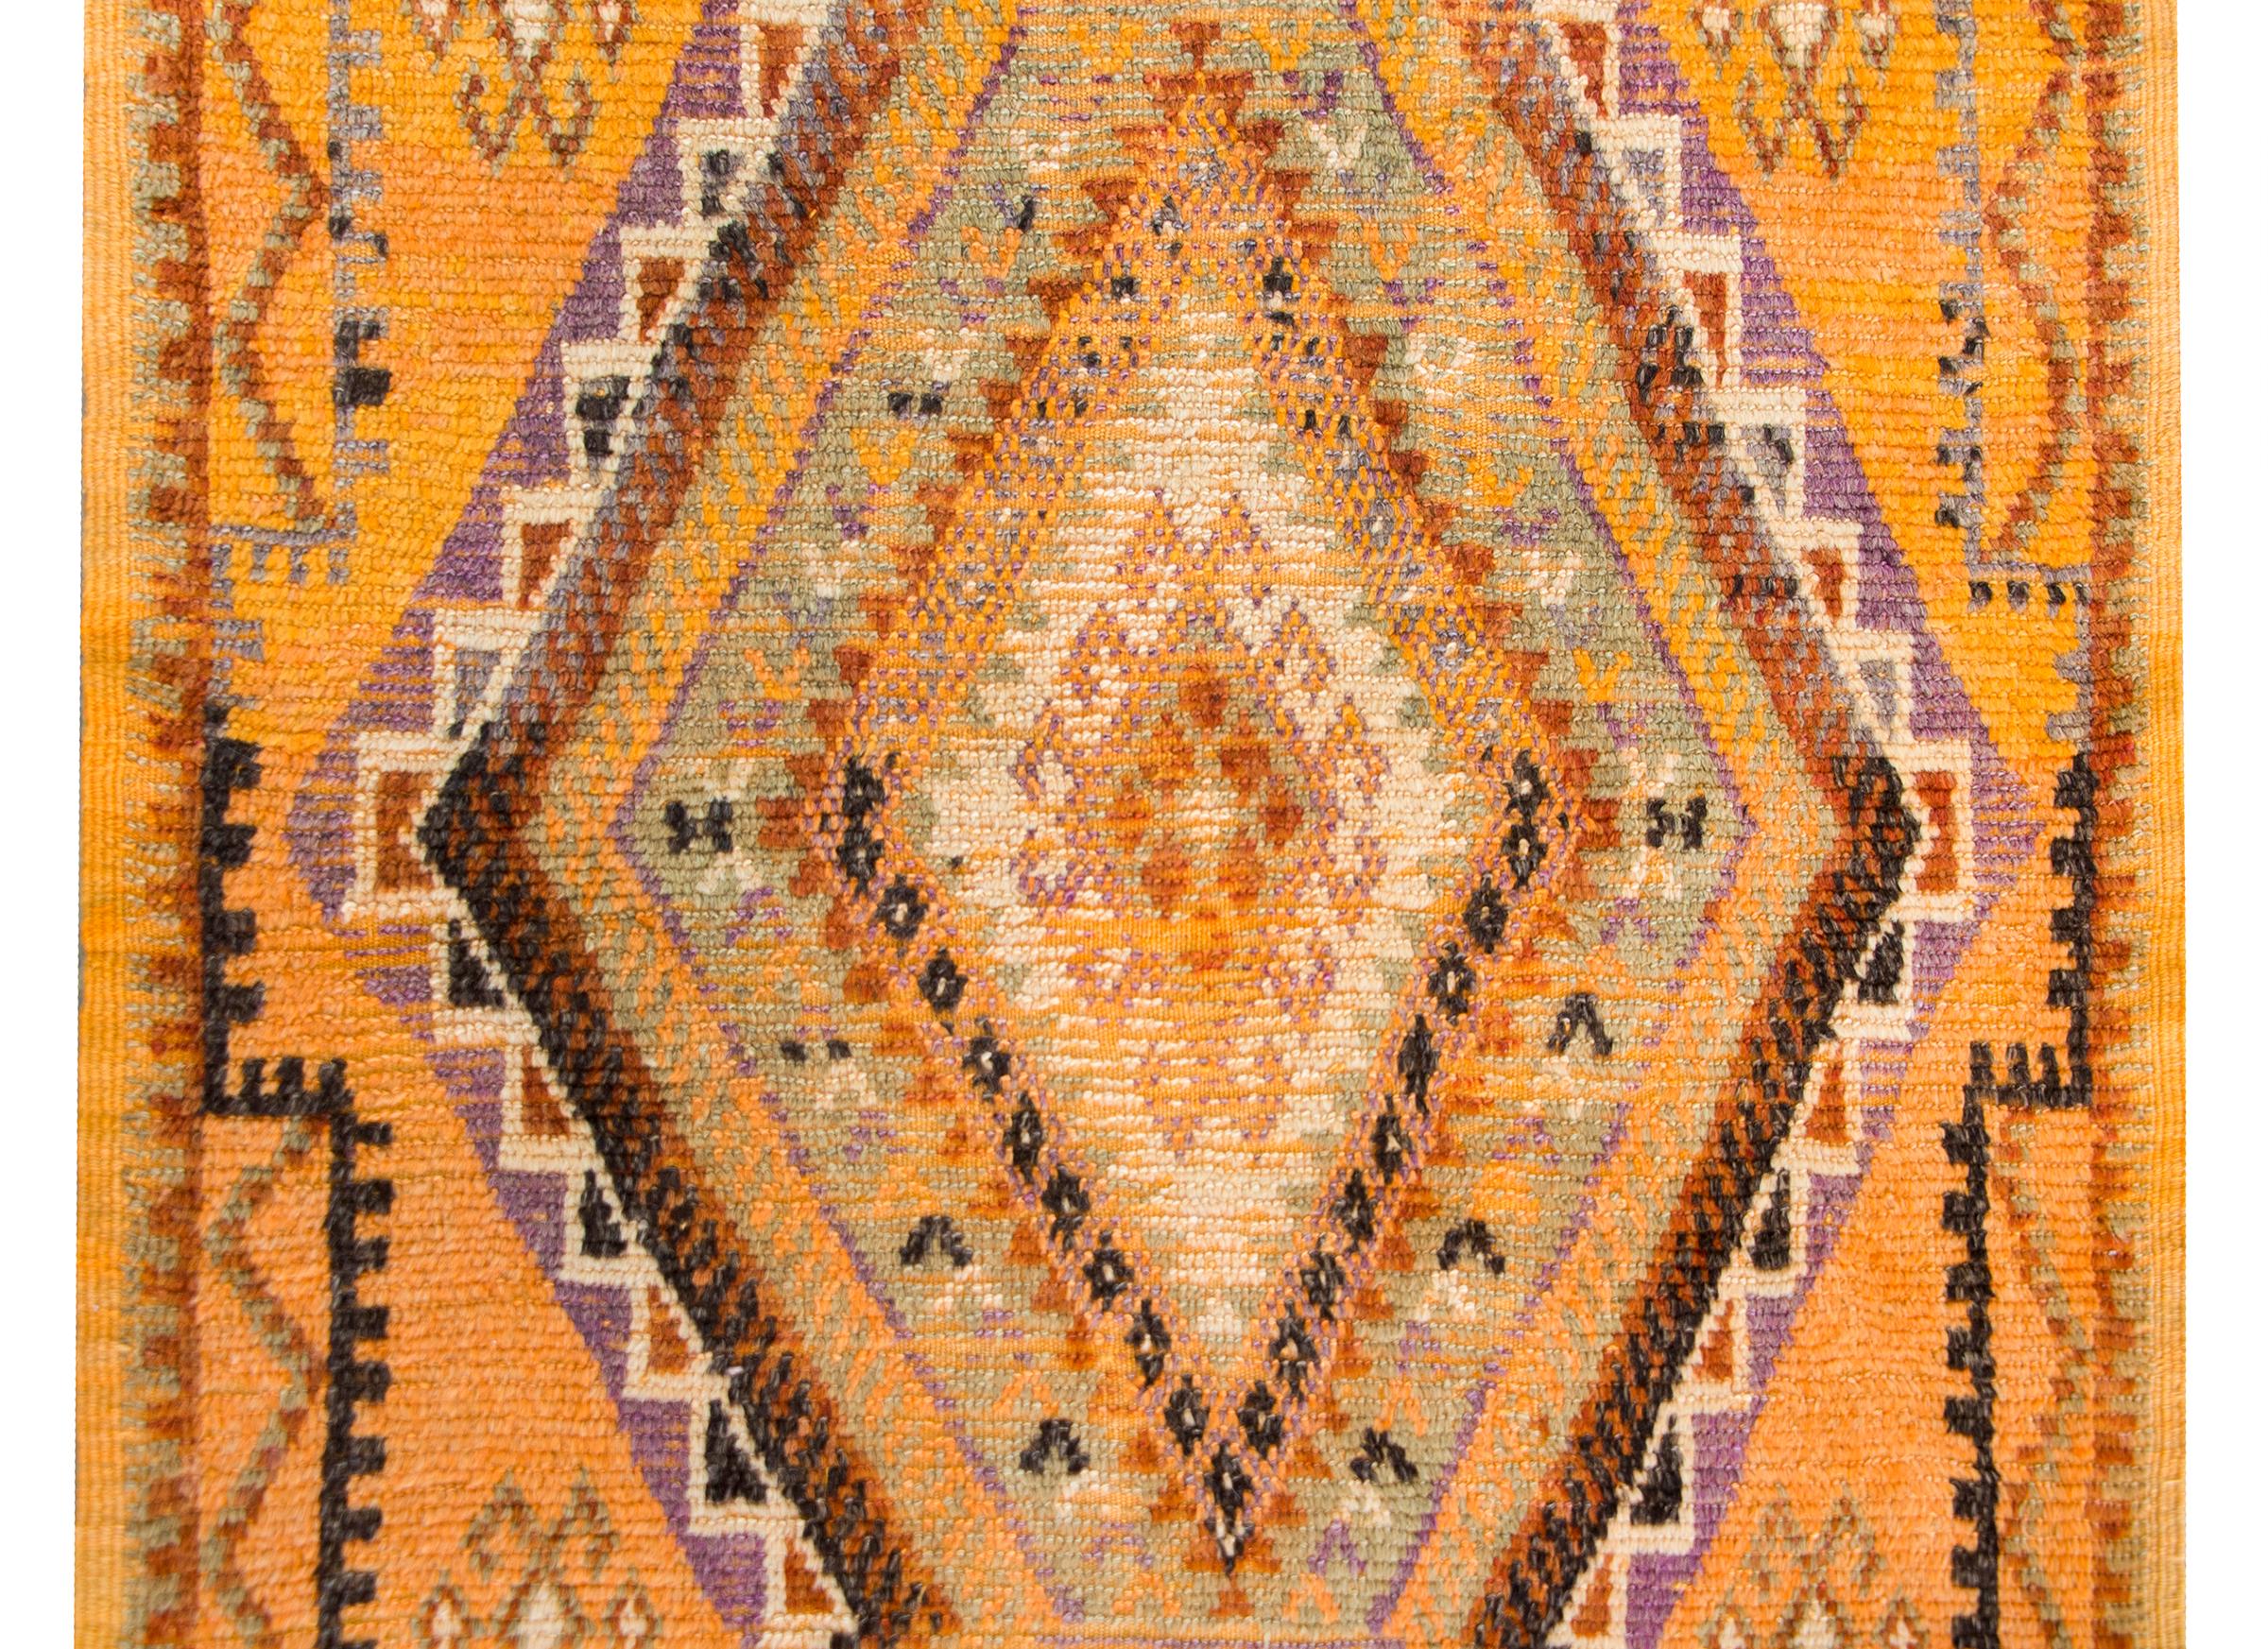 A brilliant vintage mid-20th century Moroccan rug with a central stylized floral diamond surrounded by repeated petite geometric patterned stripes woven in violet, orange, green, and gold, and all set against a saturated gold background.